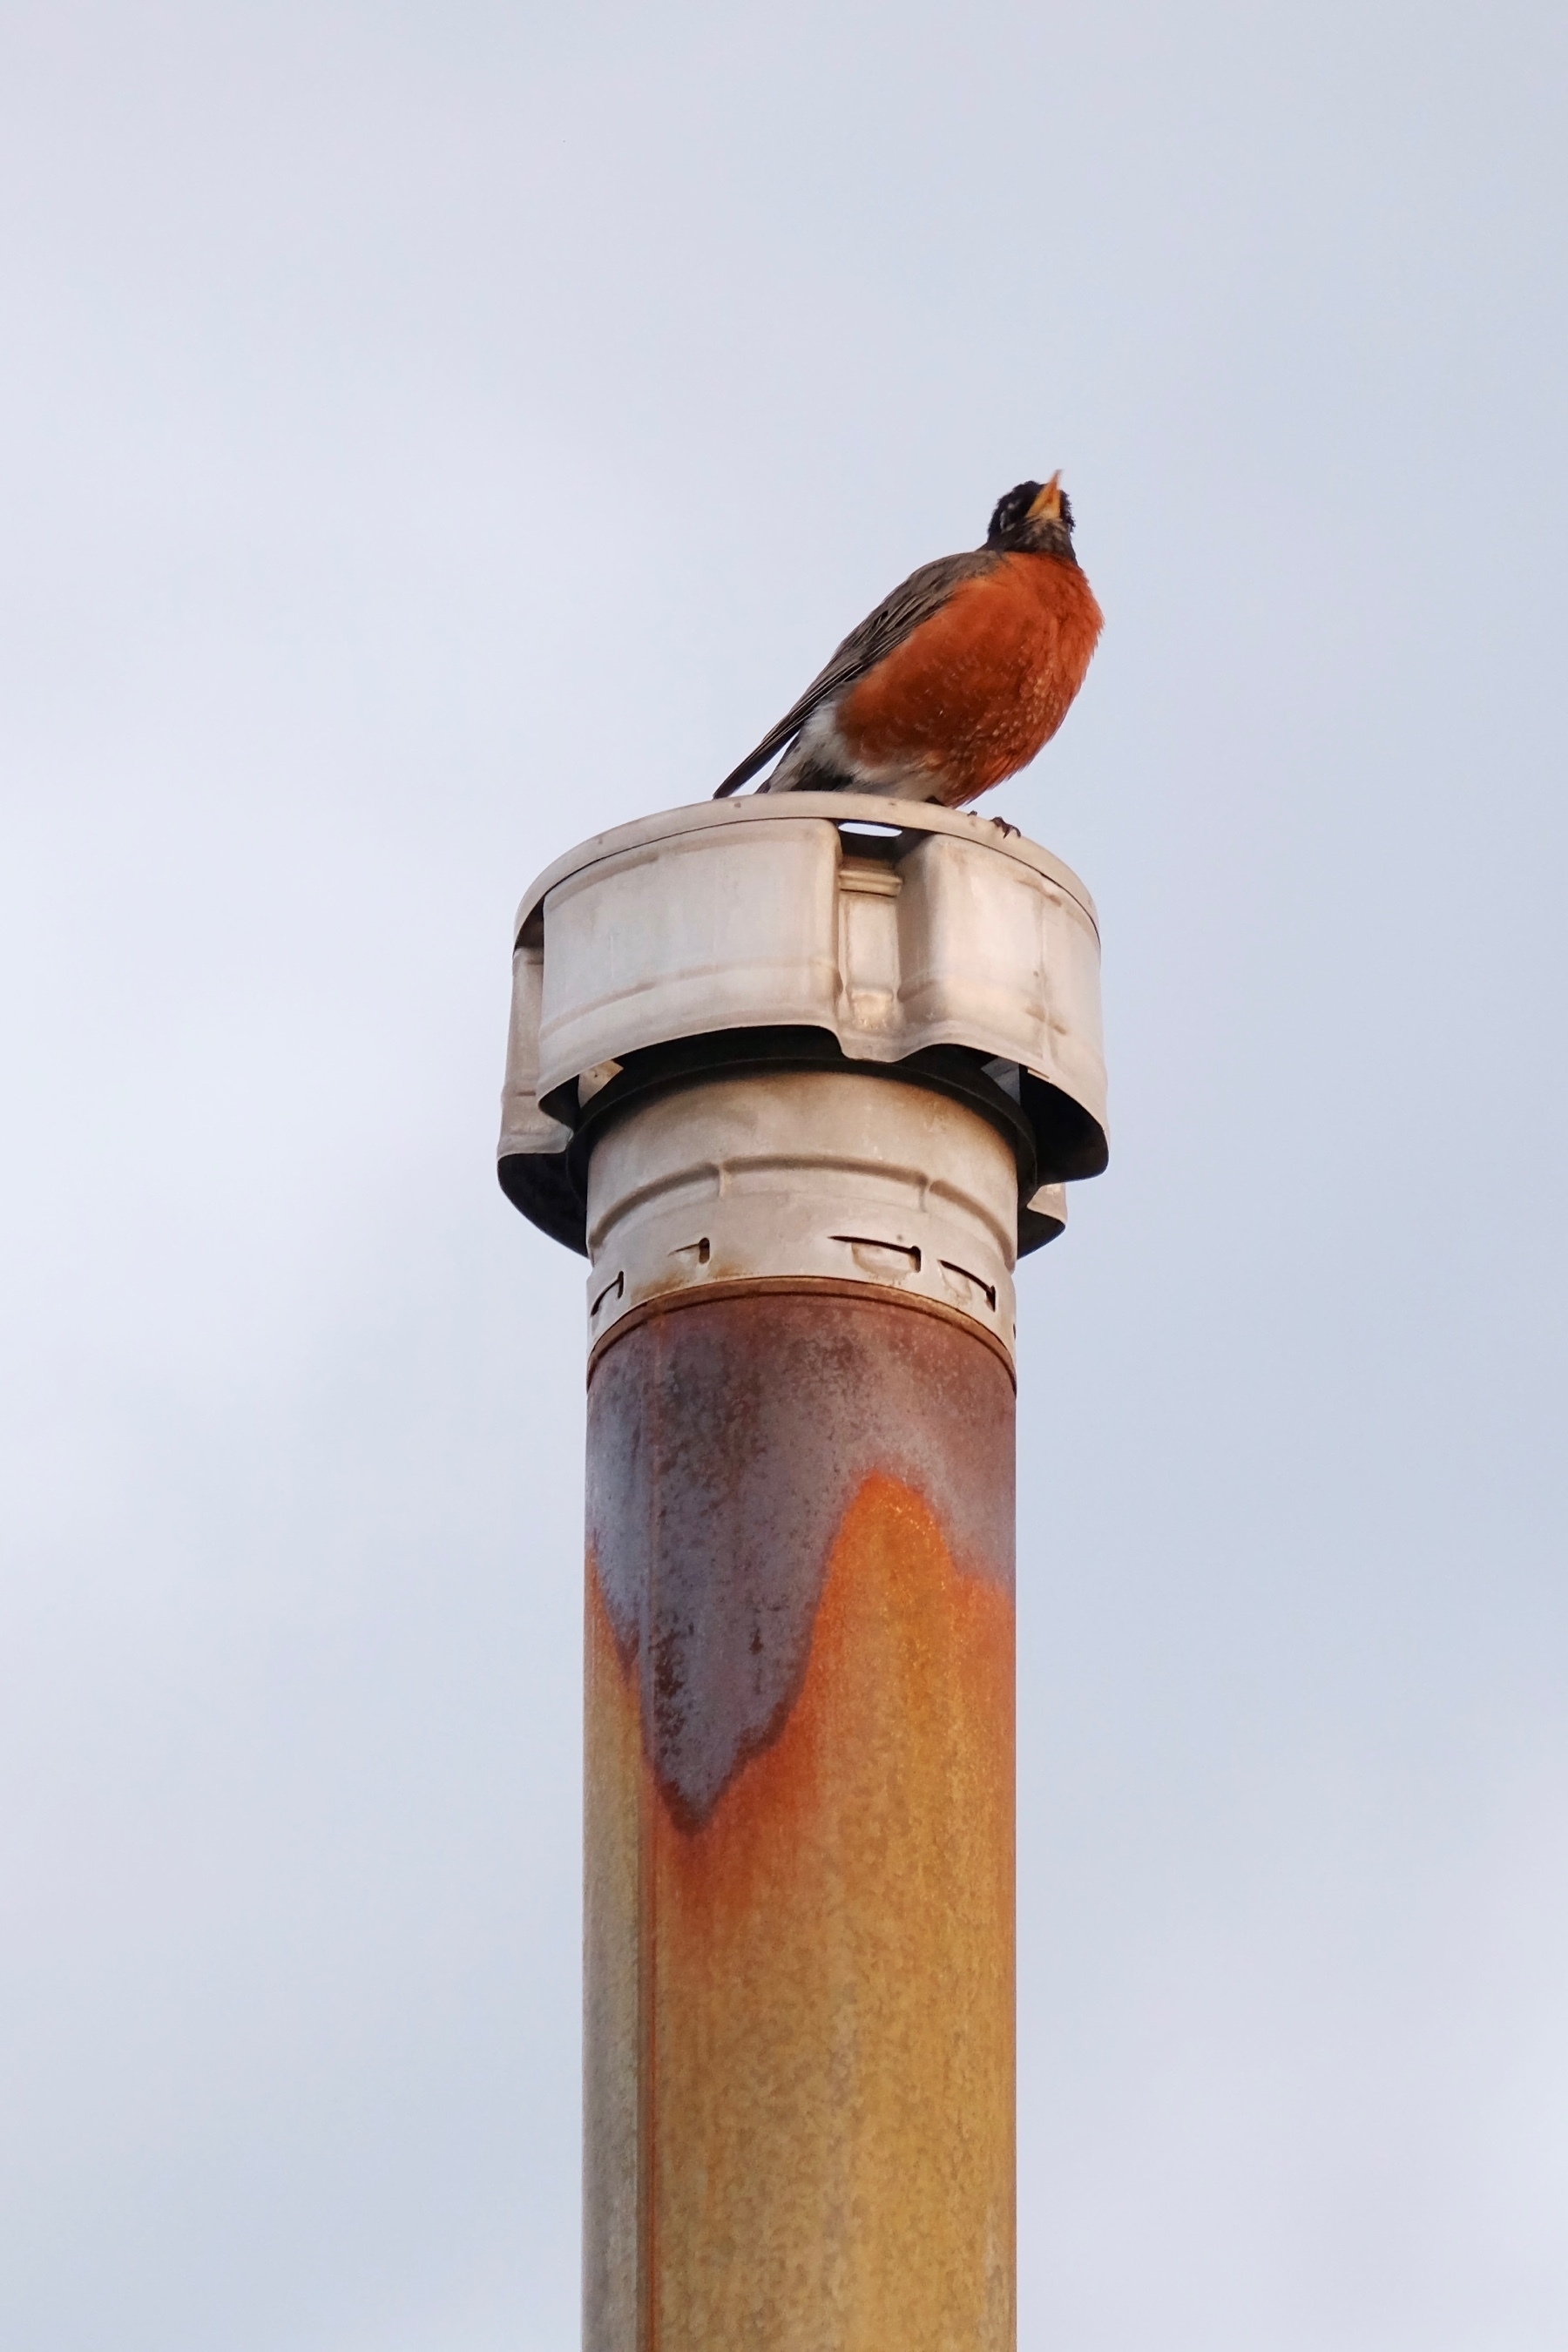 north american robin standing on pipe